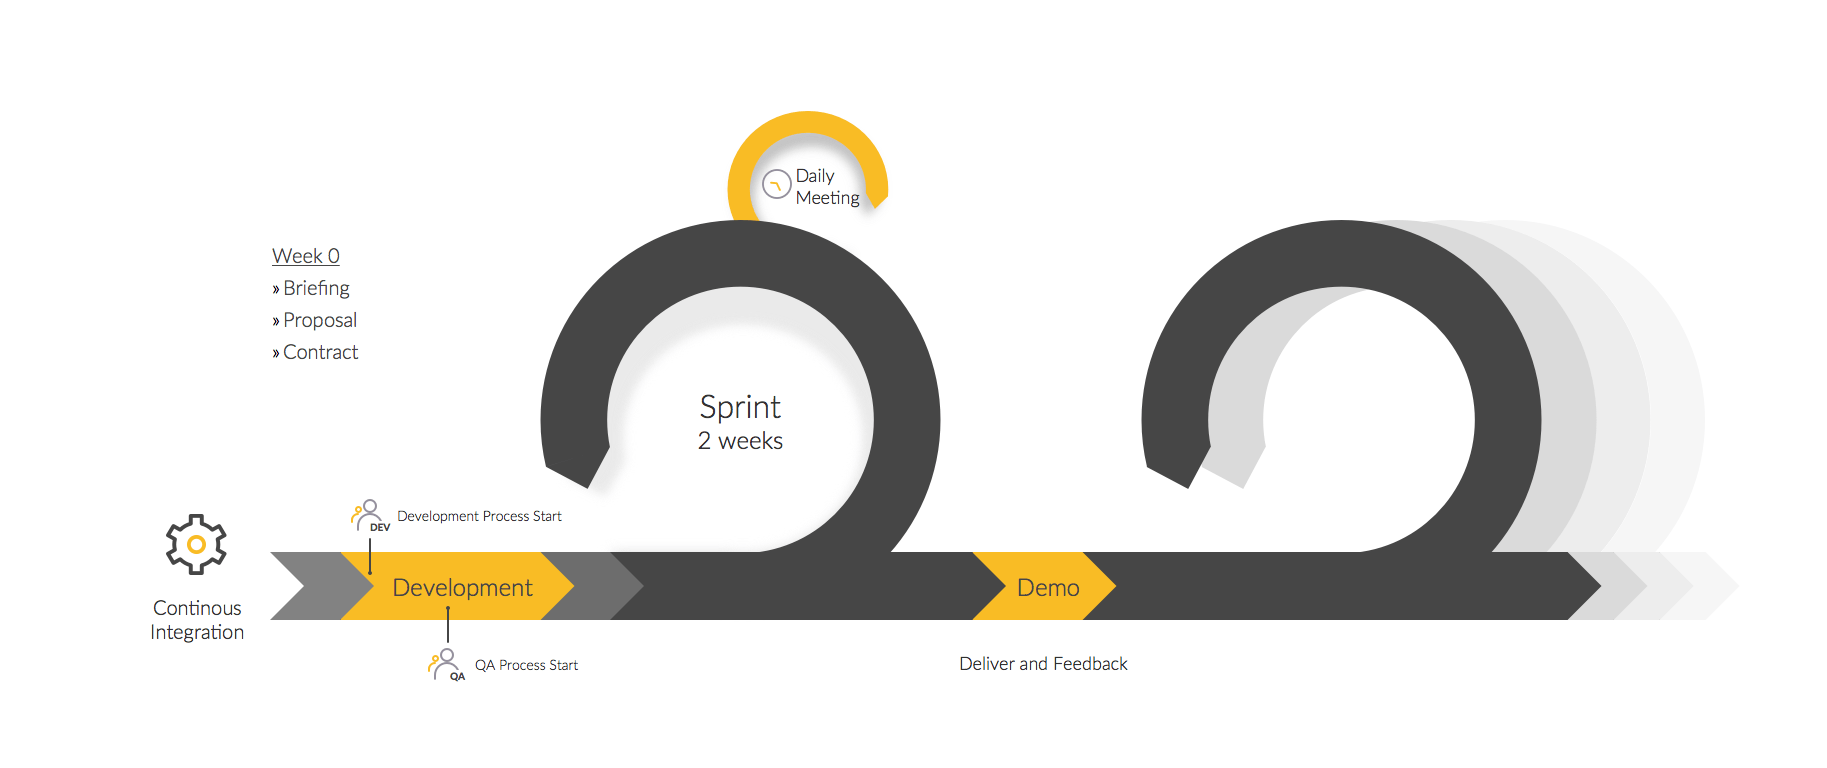 Scrum Logo - Scrum sprint explanation you will learn a lot from | Apiumhub